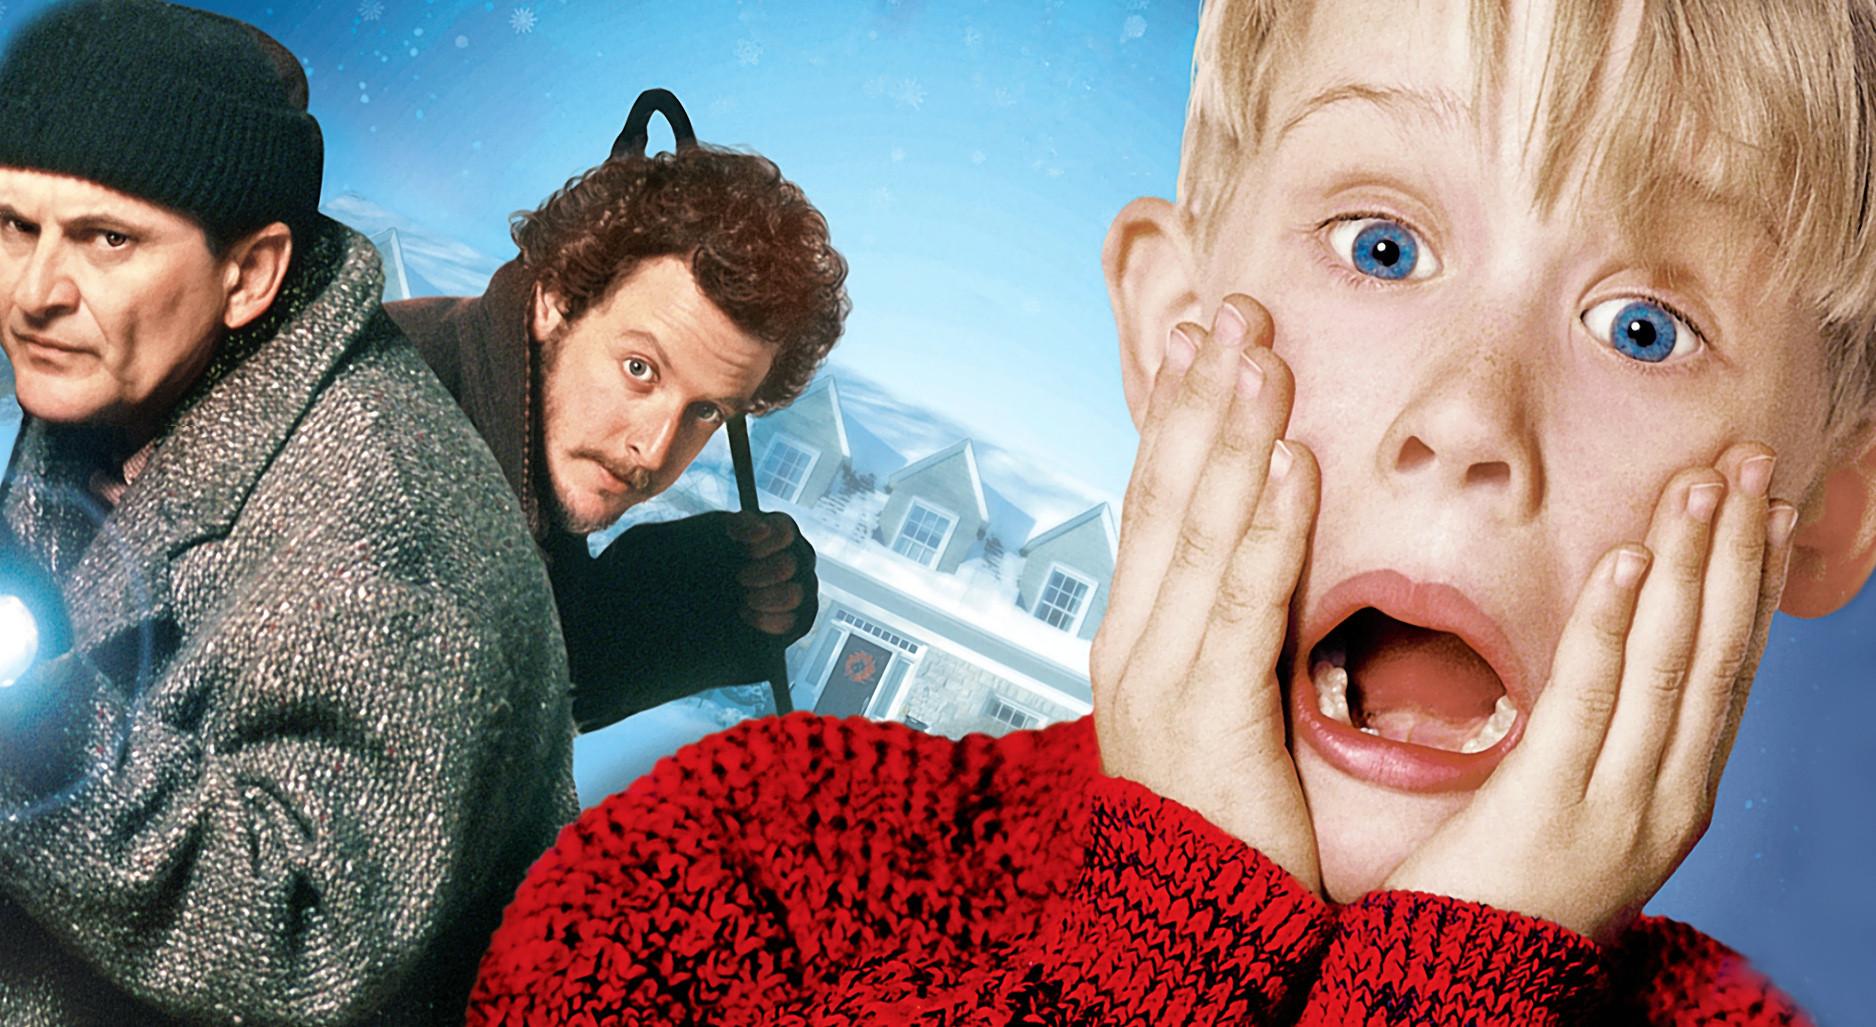 in Home Alone, which was filmed over 25 years ago.